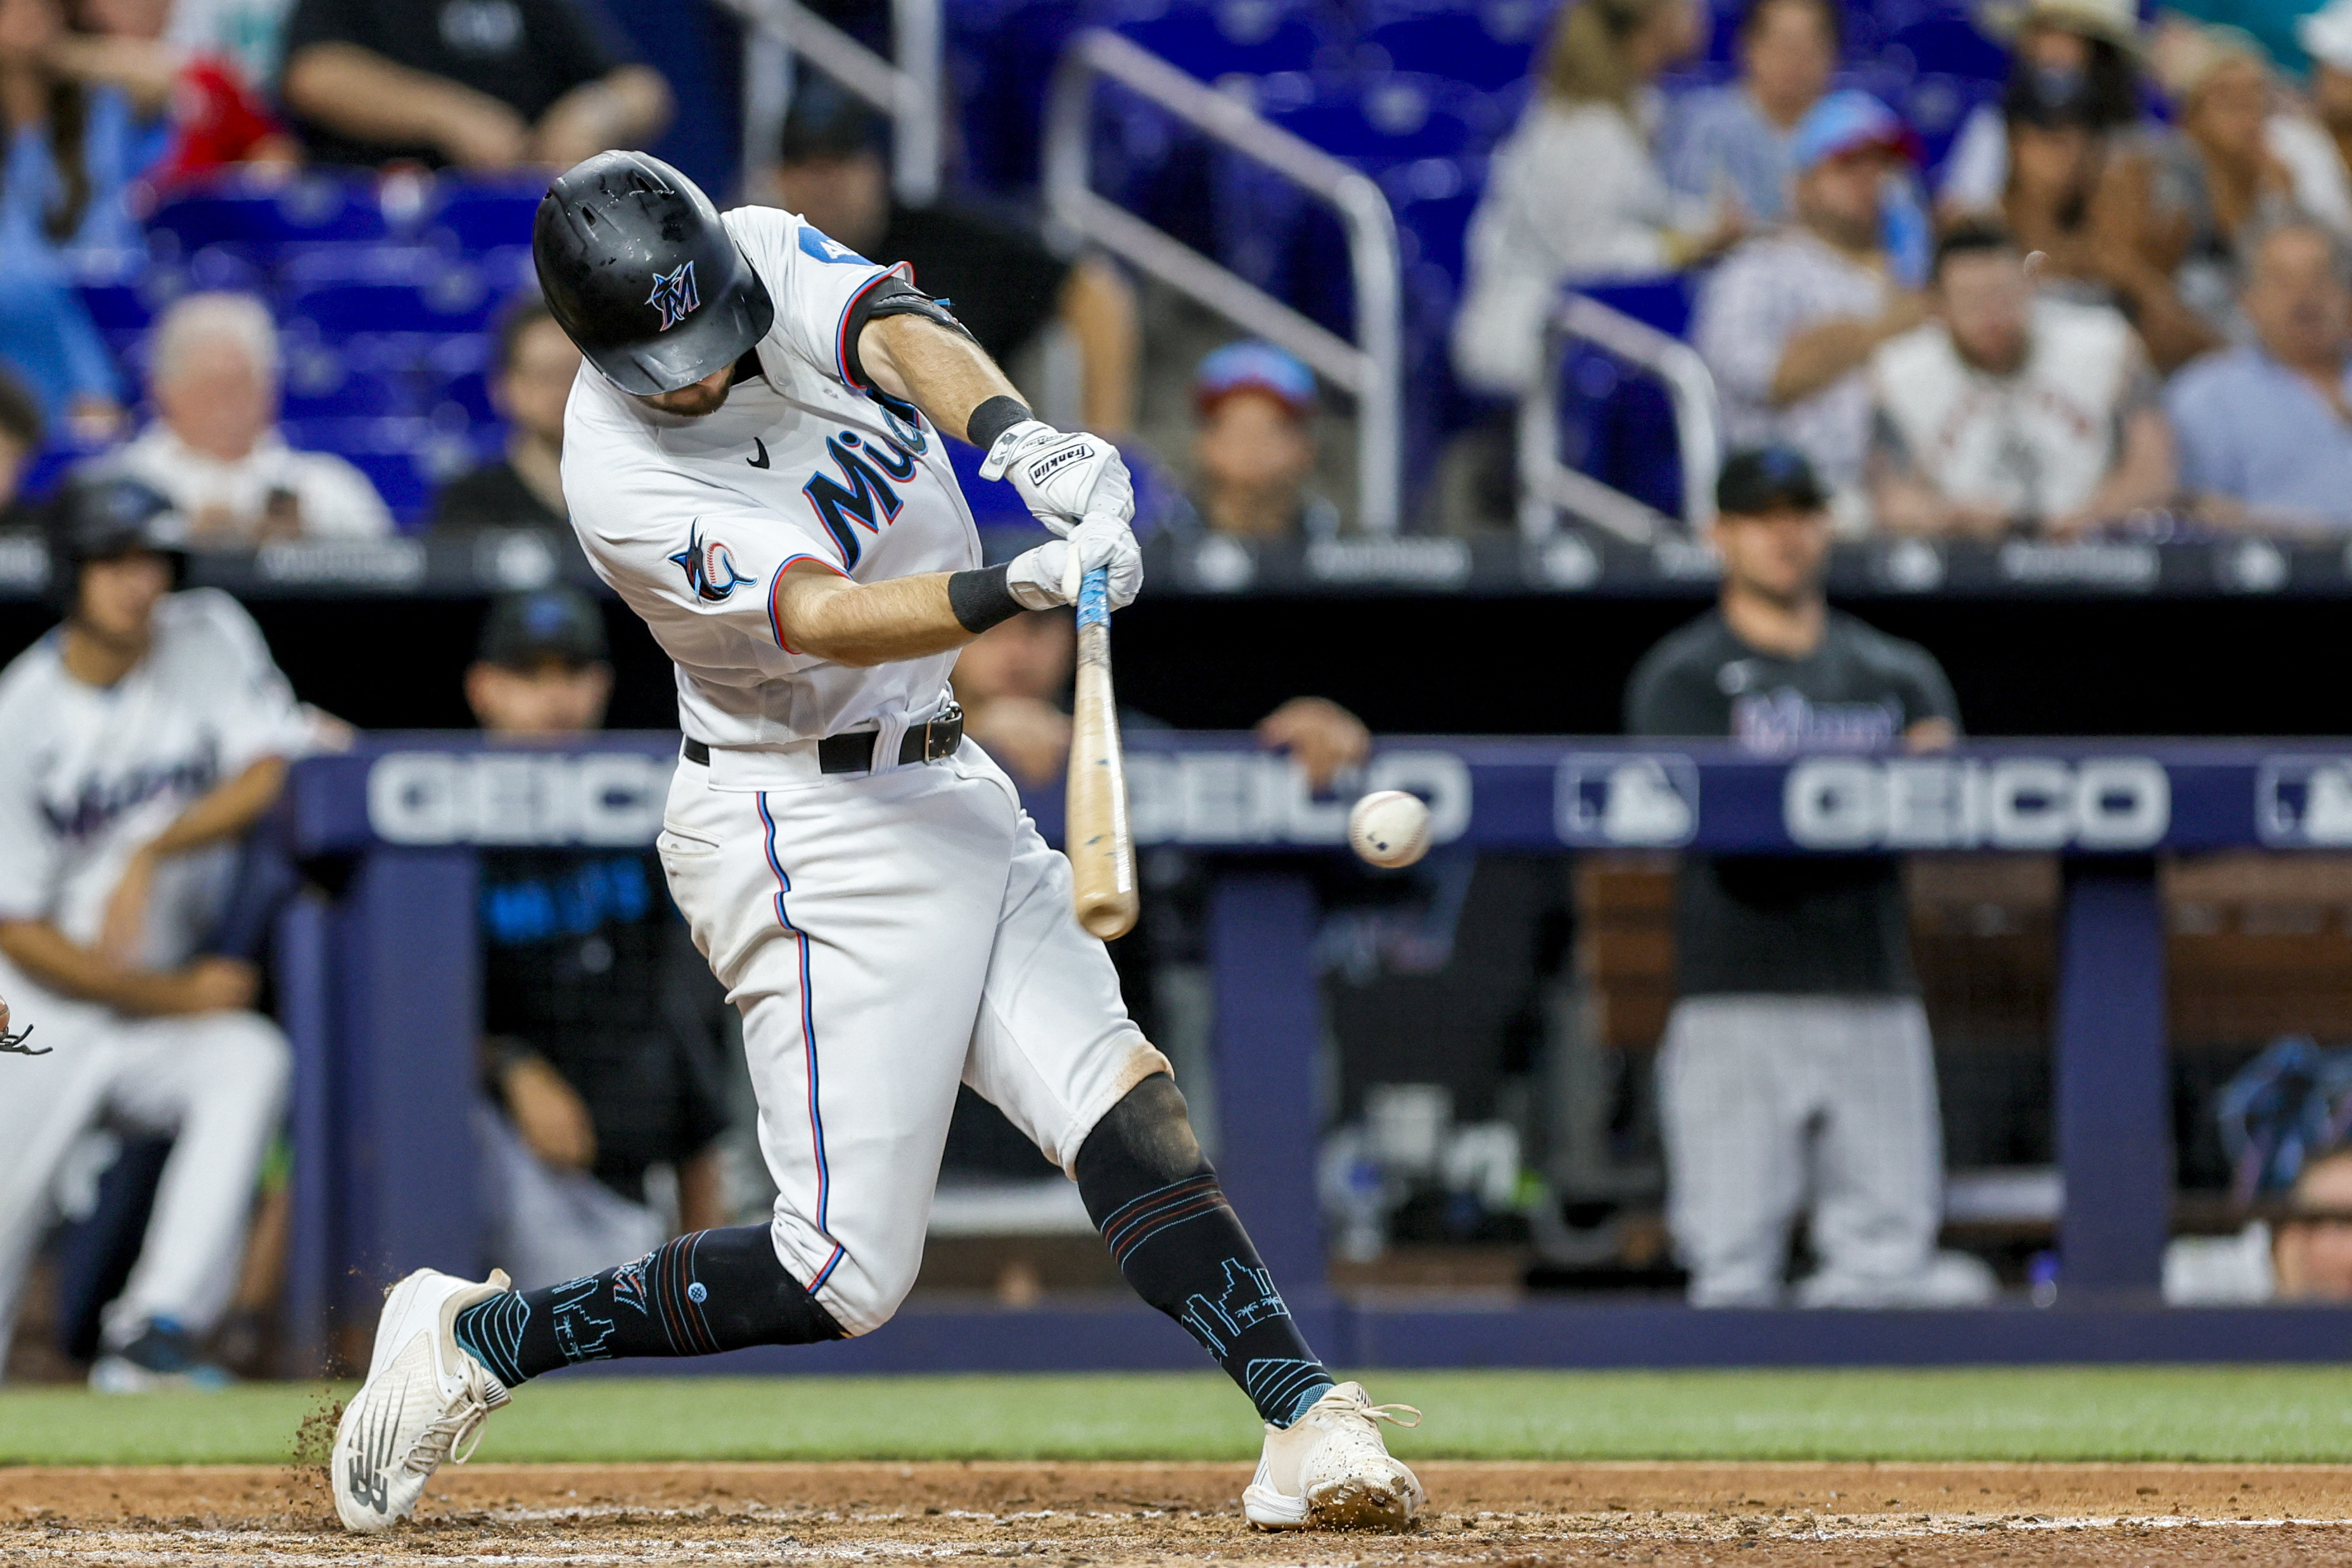 Miami Marlins' 6-3 victory over Dodgers